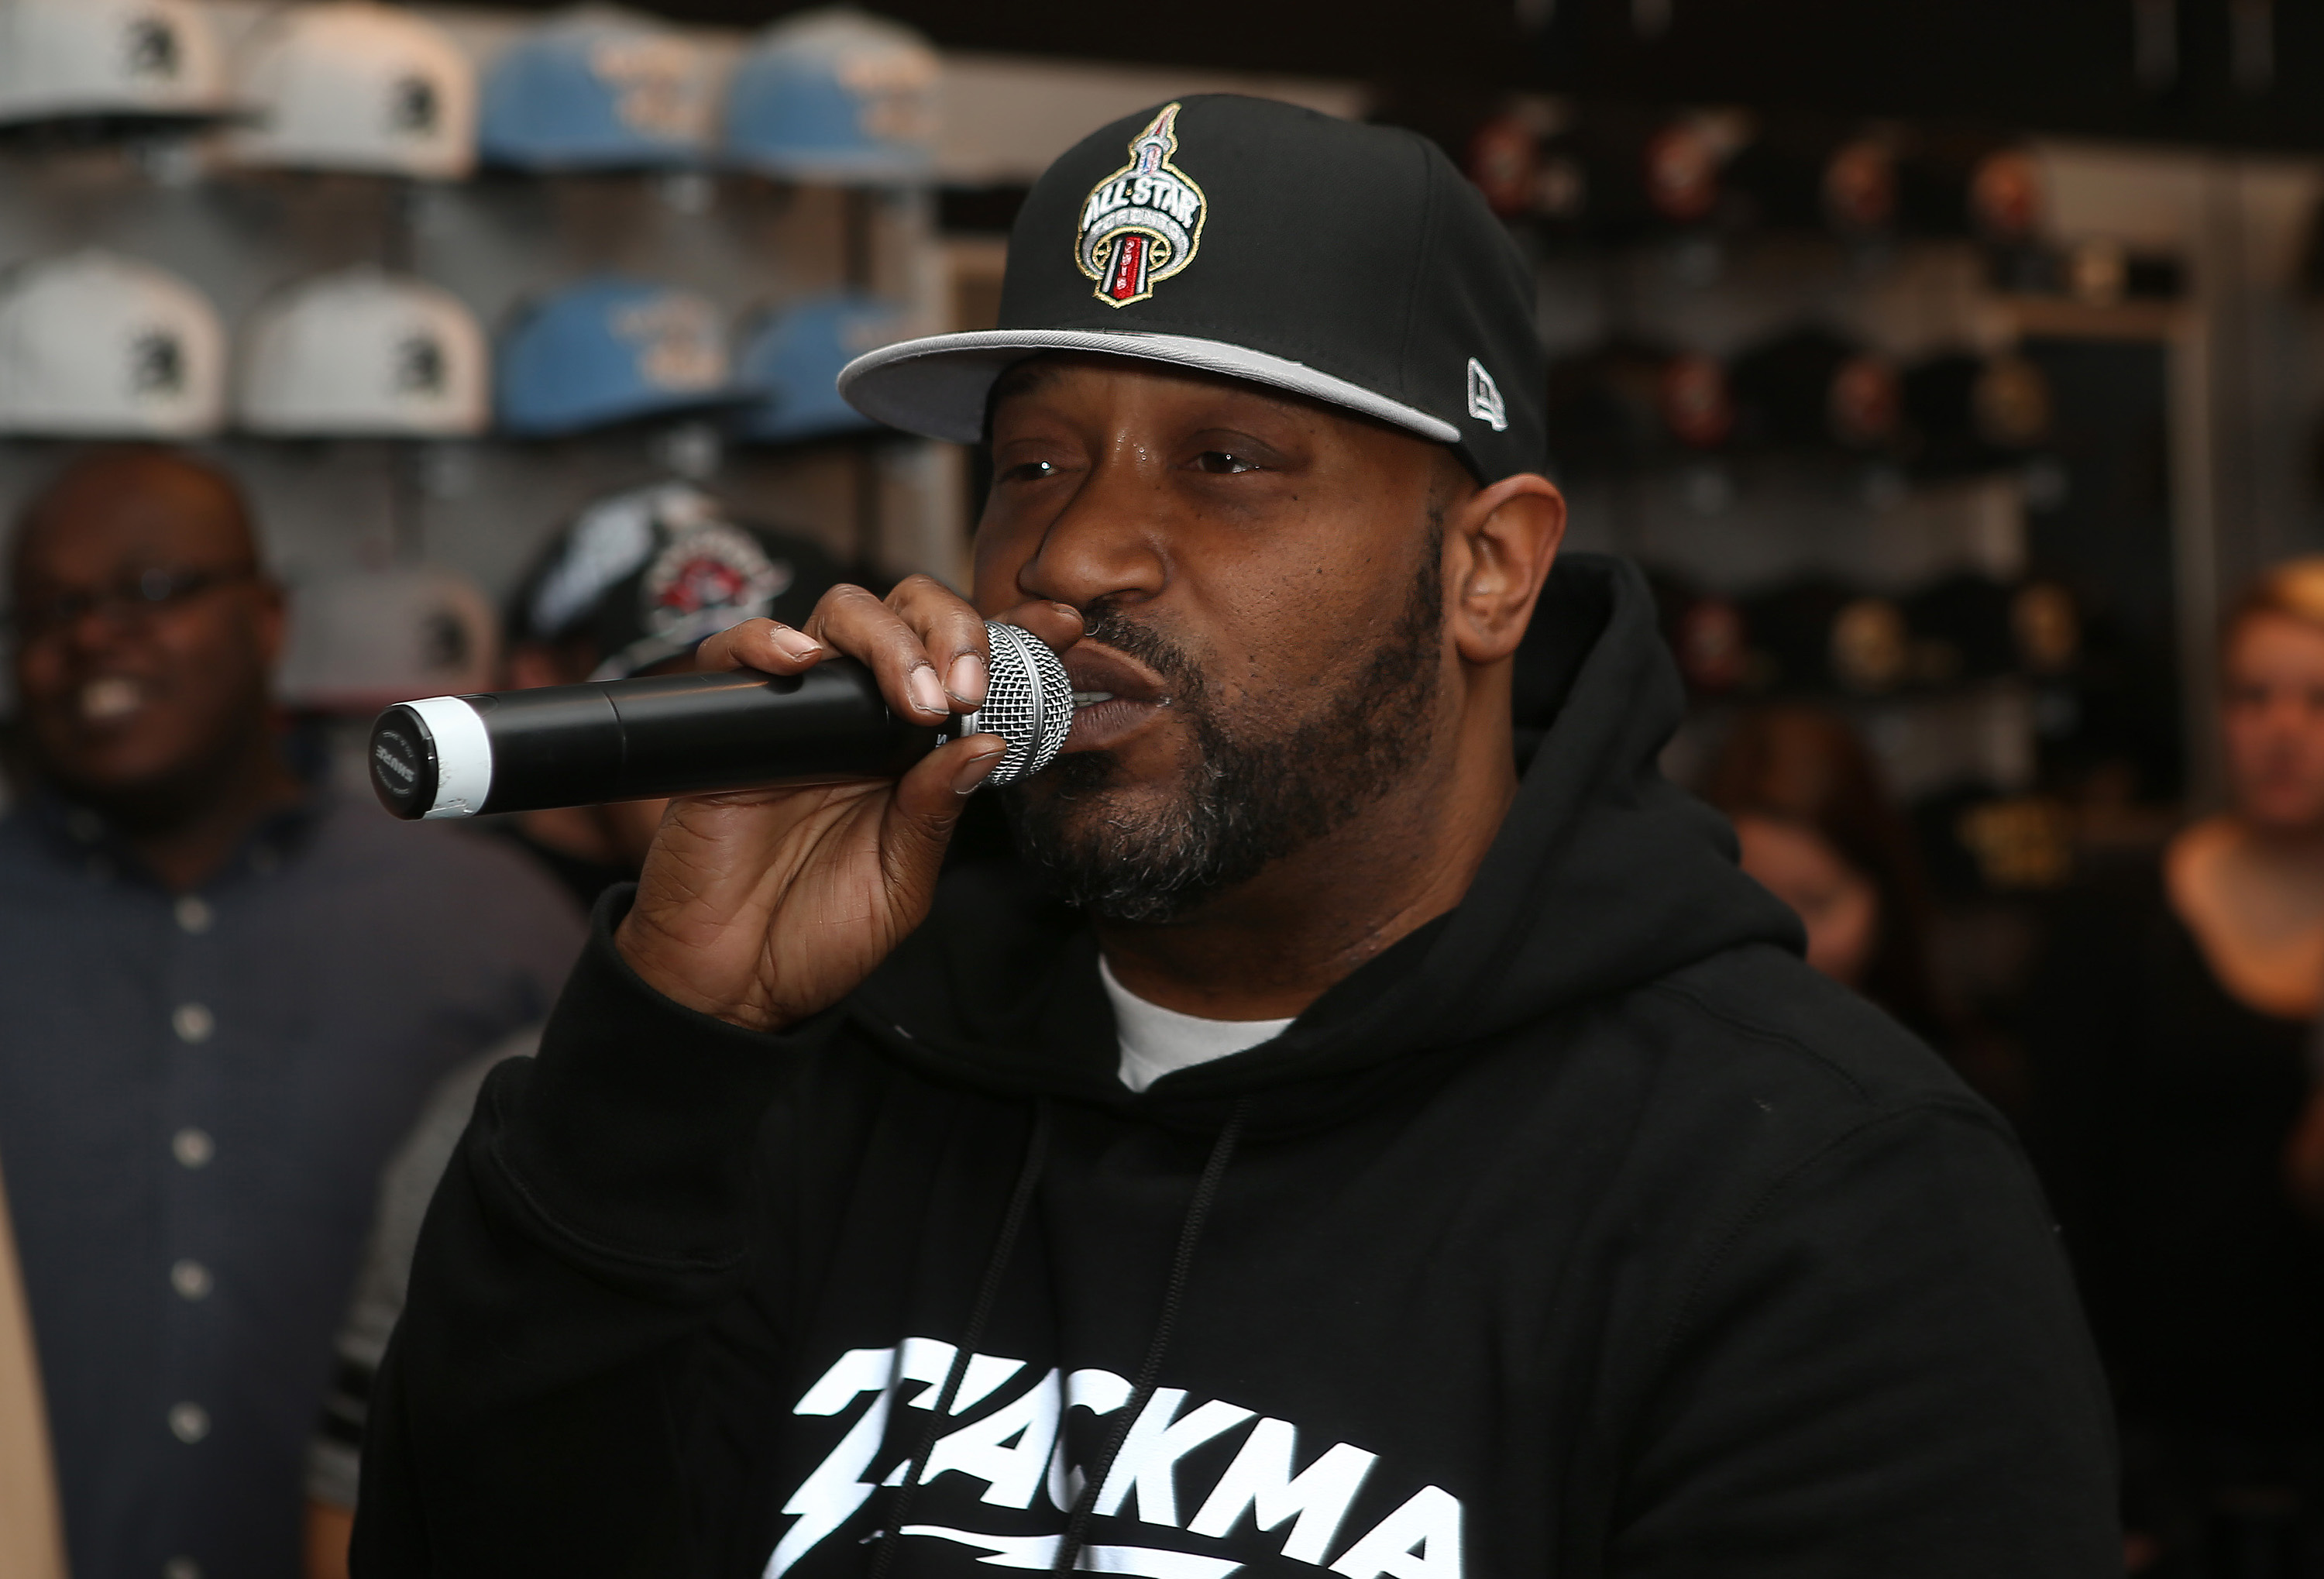 Bun B Shoots Armed Robber During Home Invasion